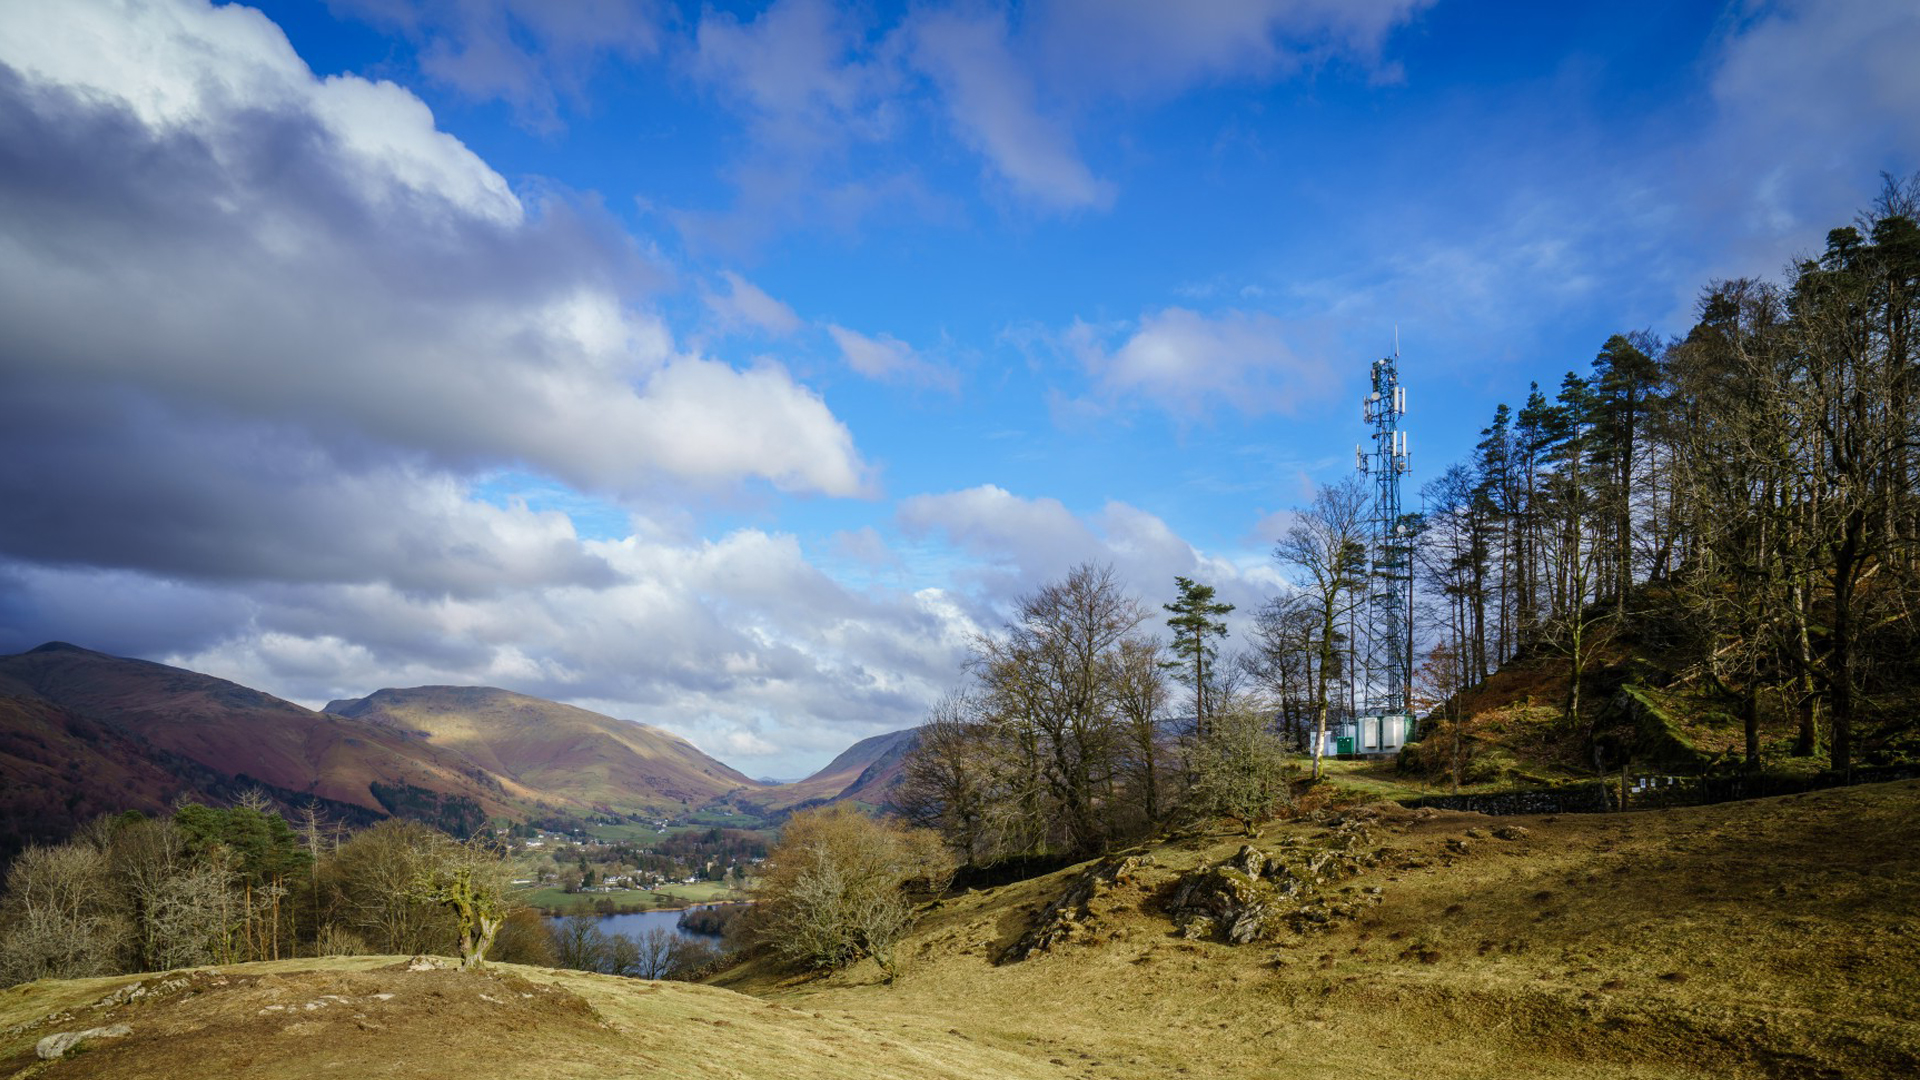 Climate risk analytics protect critical infrastructure such as this BT telecommunications mast in the Lake District, UK